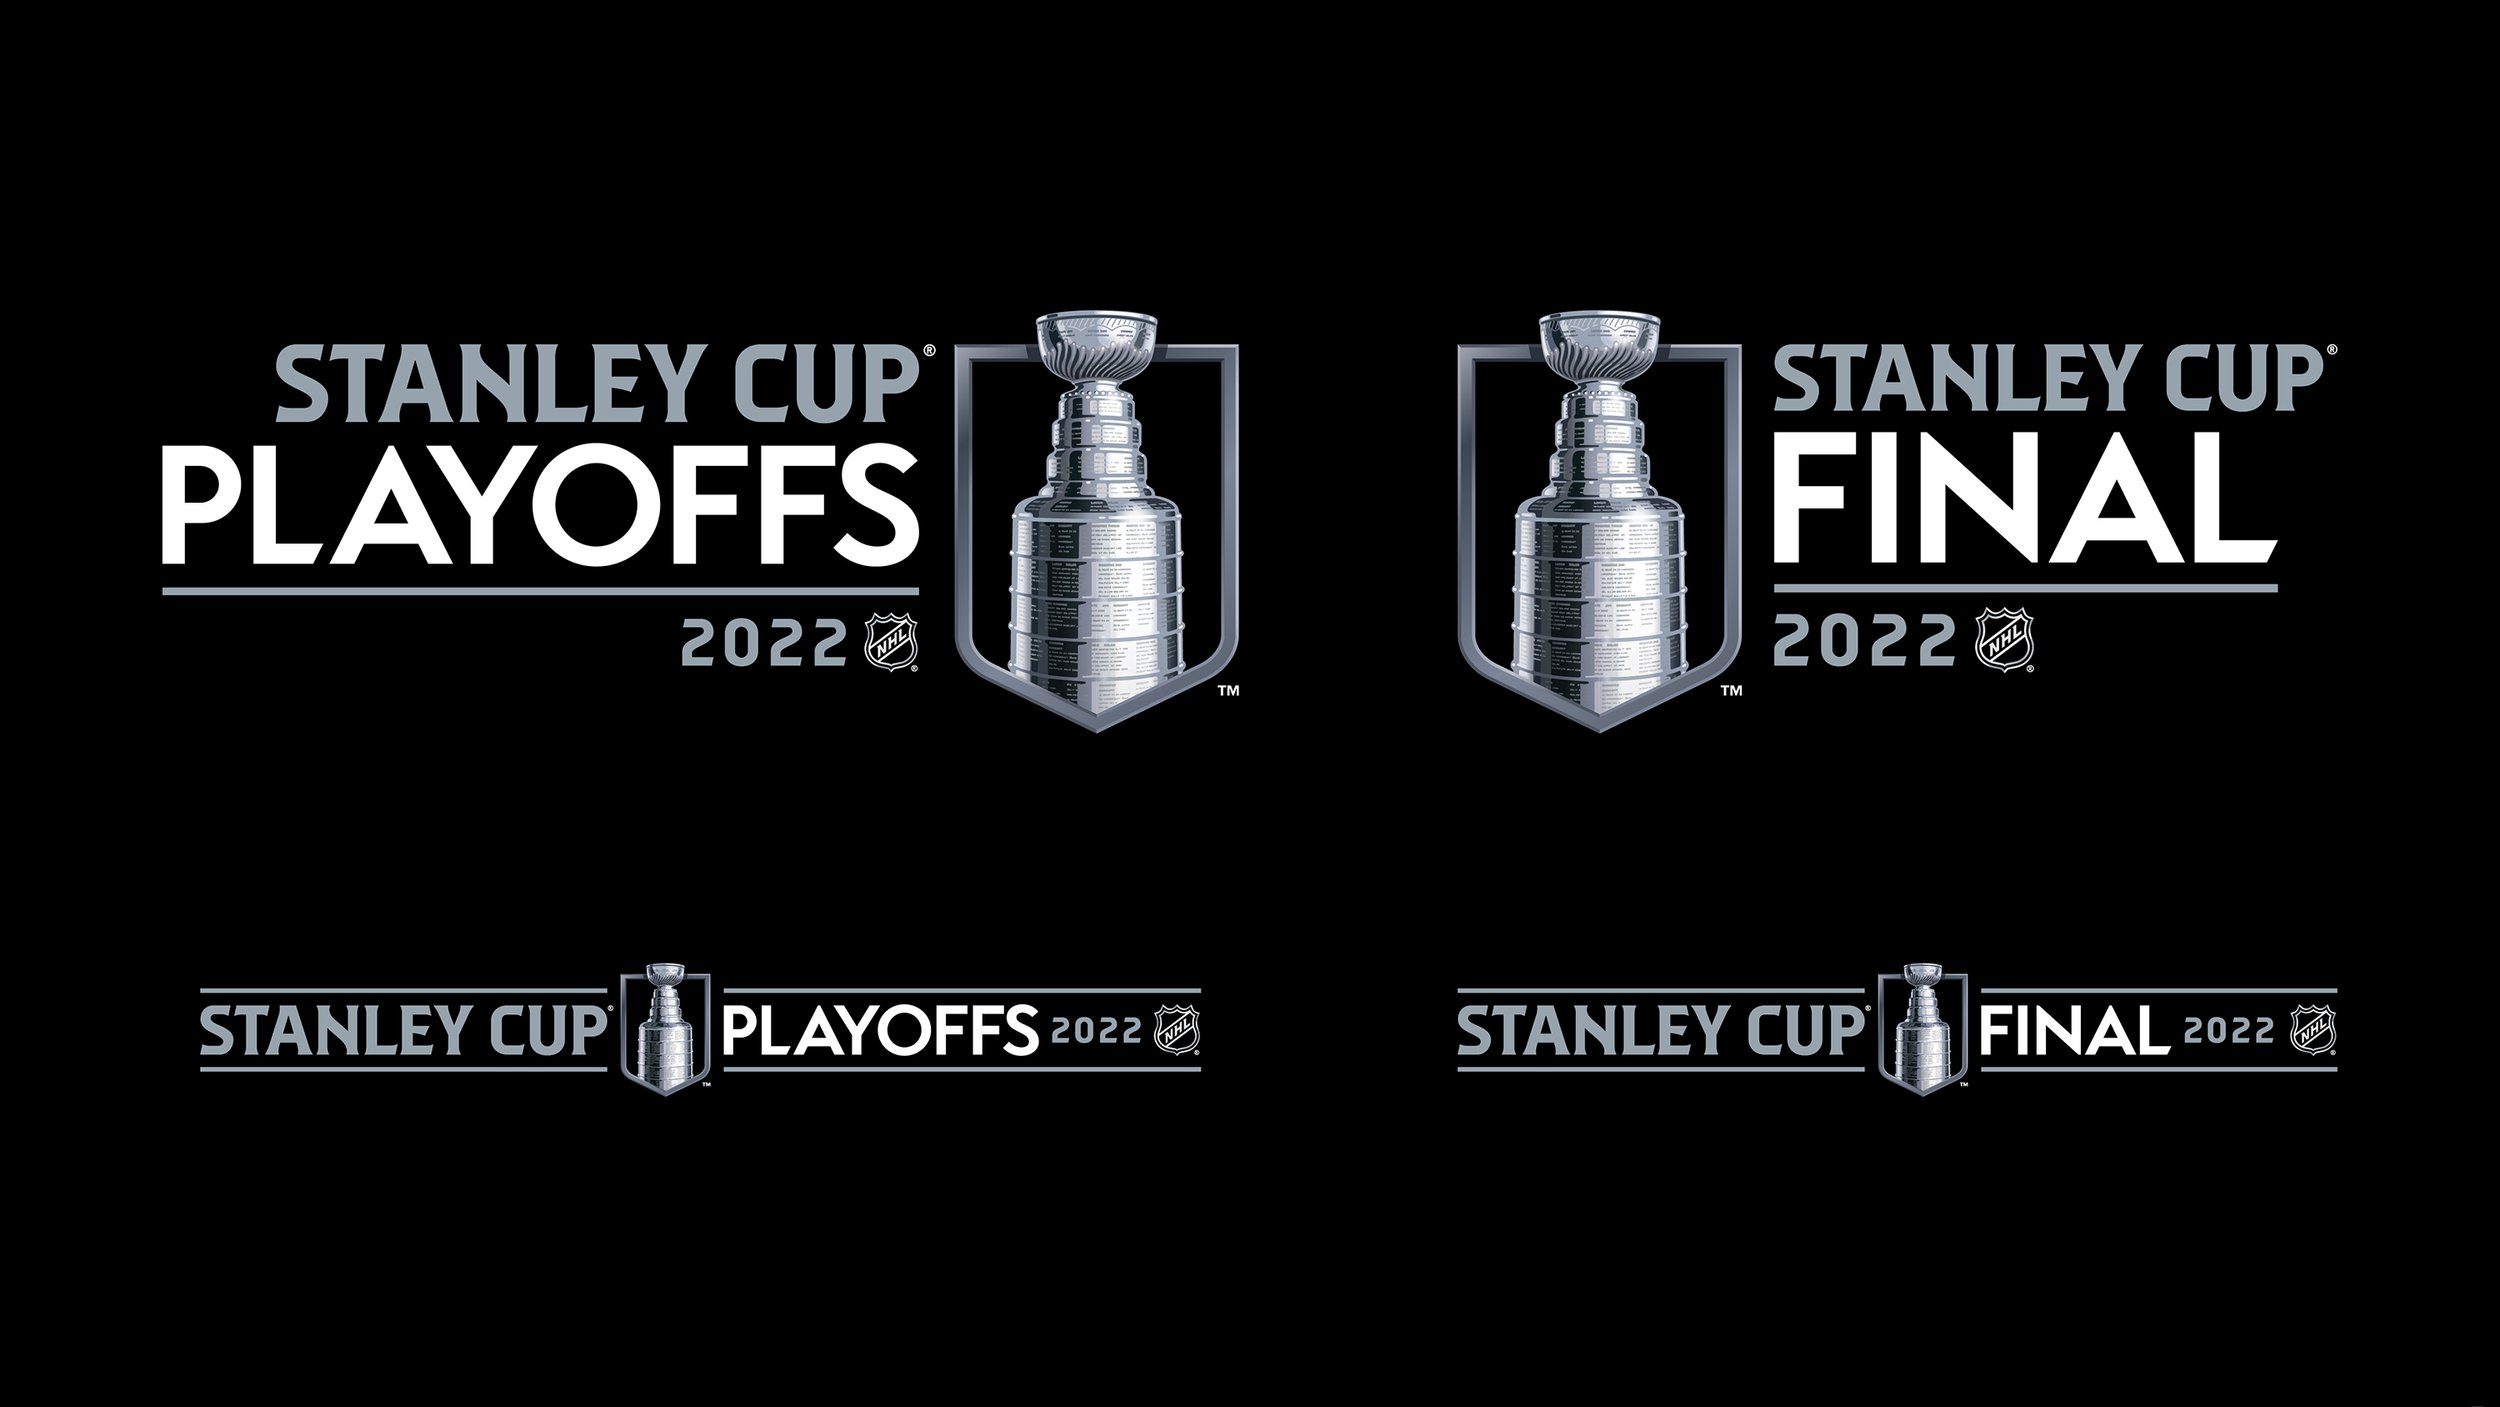 New logo for Stanley Cup playoffs and Final unveiled